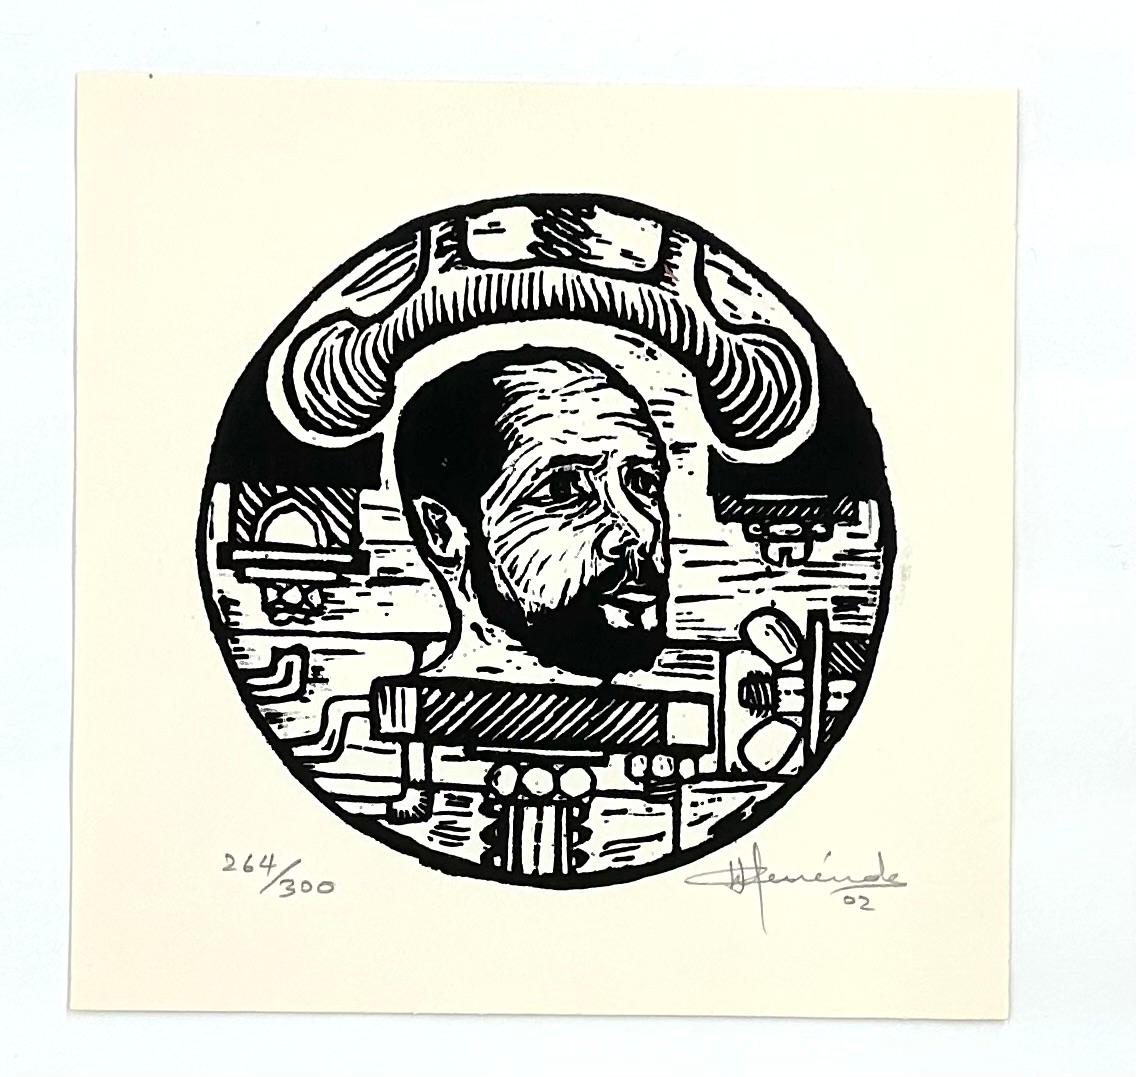 Juan Carlos Menendez (Cuba, )
'Untitled (La Huella Múltiple)', 2002
engraving on paper
8.1 x 8.1 in. (20.5 x 20.5 cm.)
Edition of 300
ID: HUE-234
Hand-signed by author